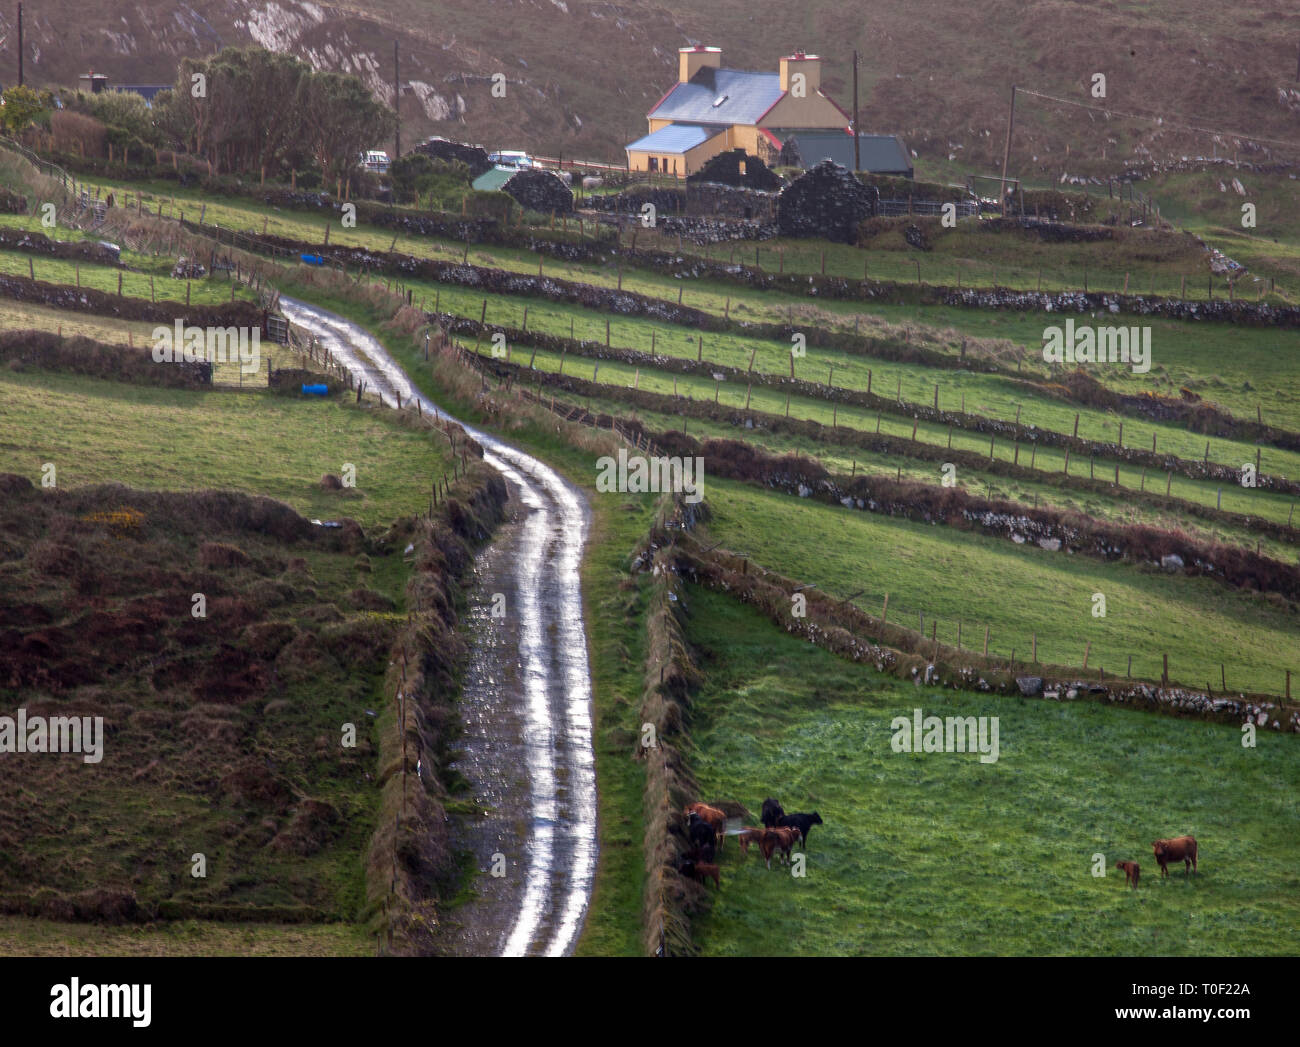 Dursey Island, Cork, Ireland. 29th April, 2015. The only road through the island passing the townland of Kilmichael, Dursey, Co. Cork, Ireland Stock Photo